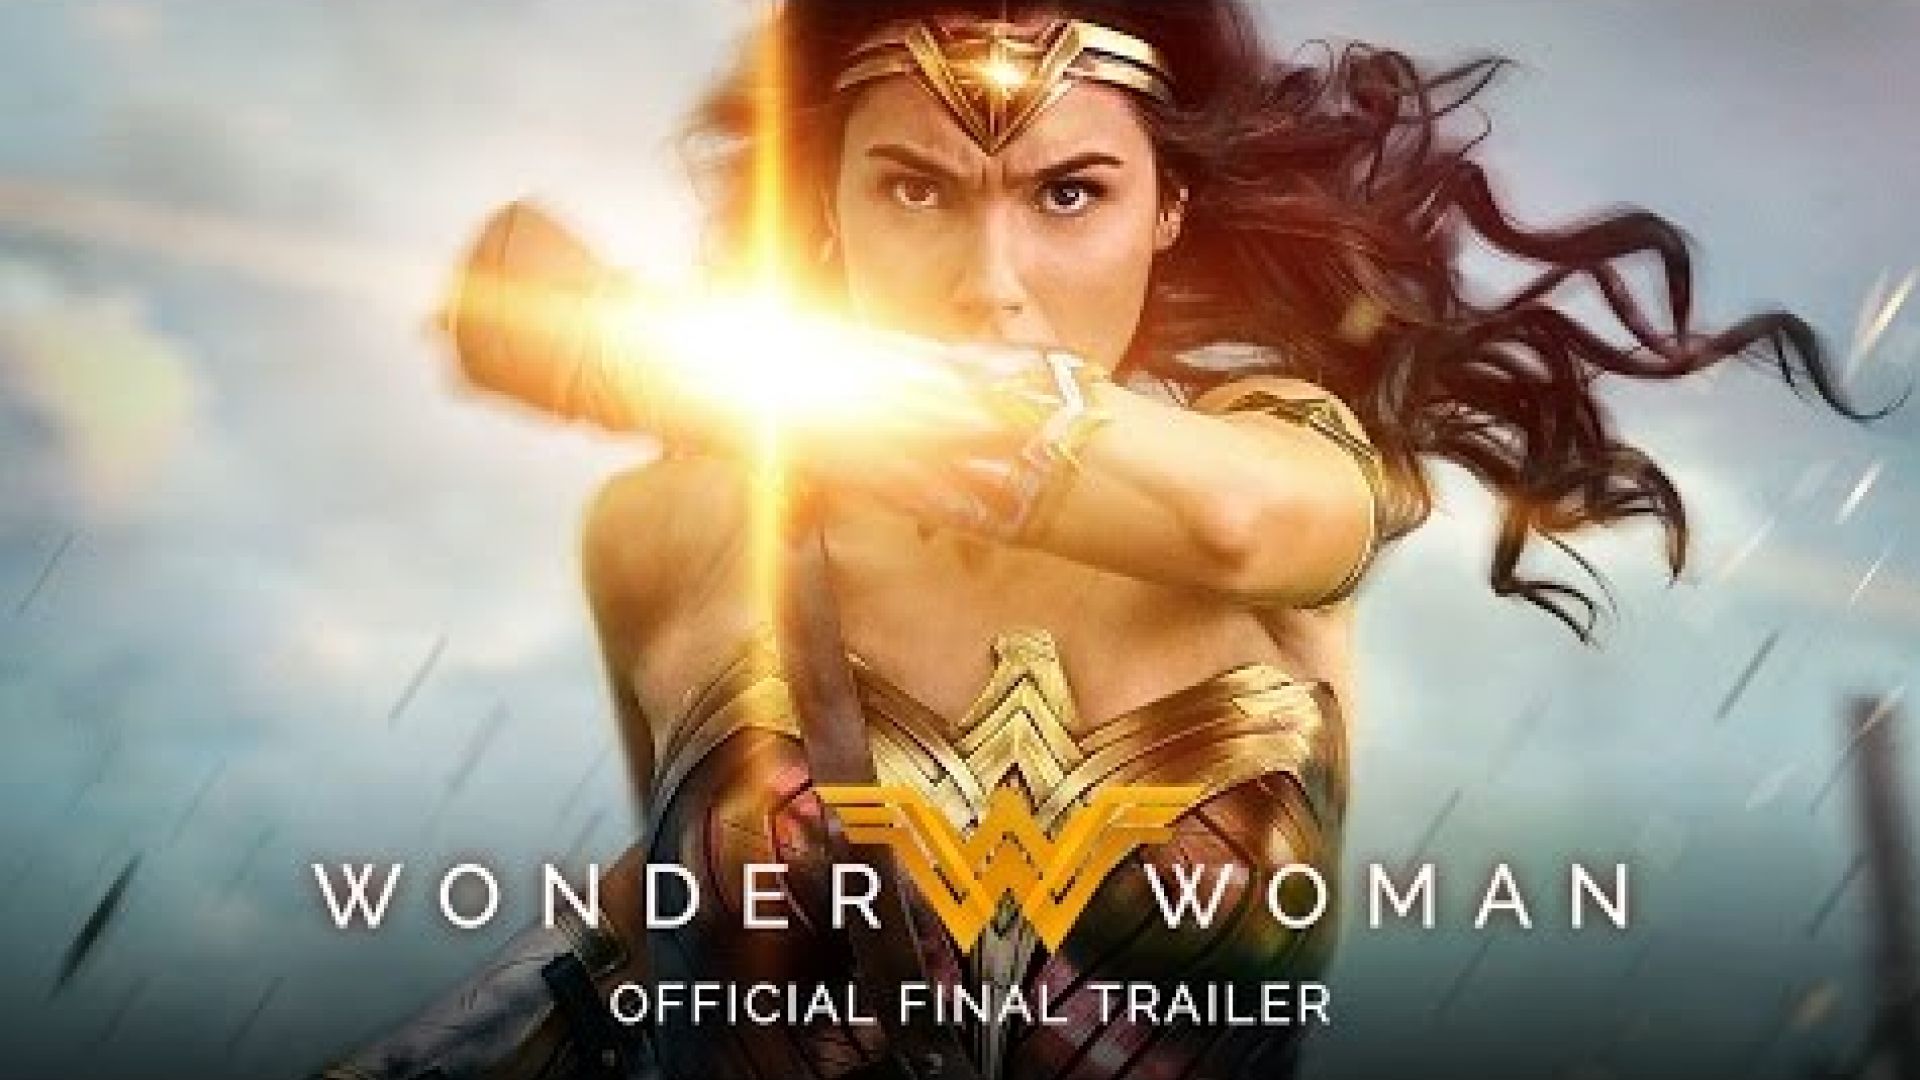 New Final 'Wonder Woman' Trailer: Rise of The Warrior